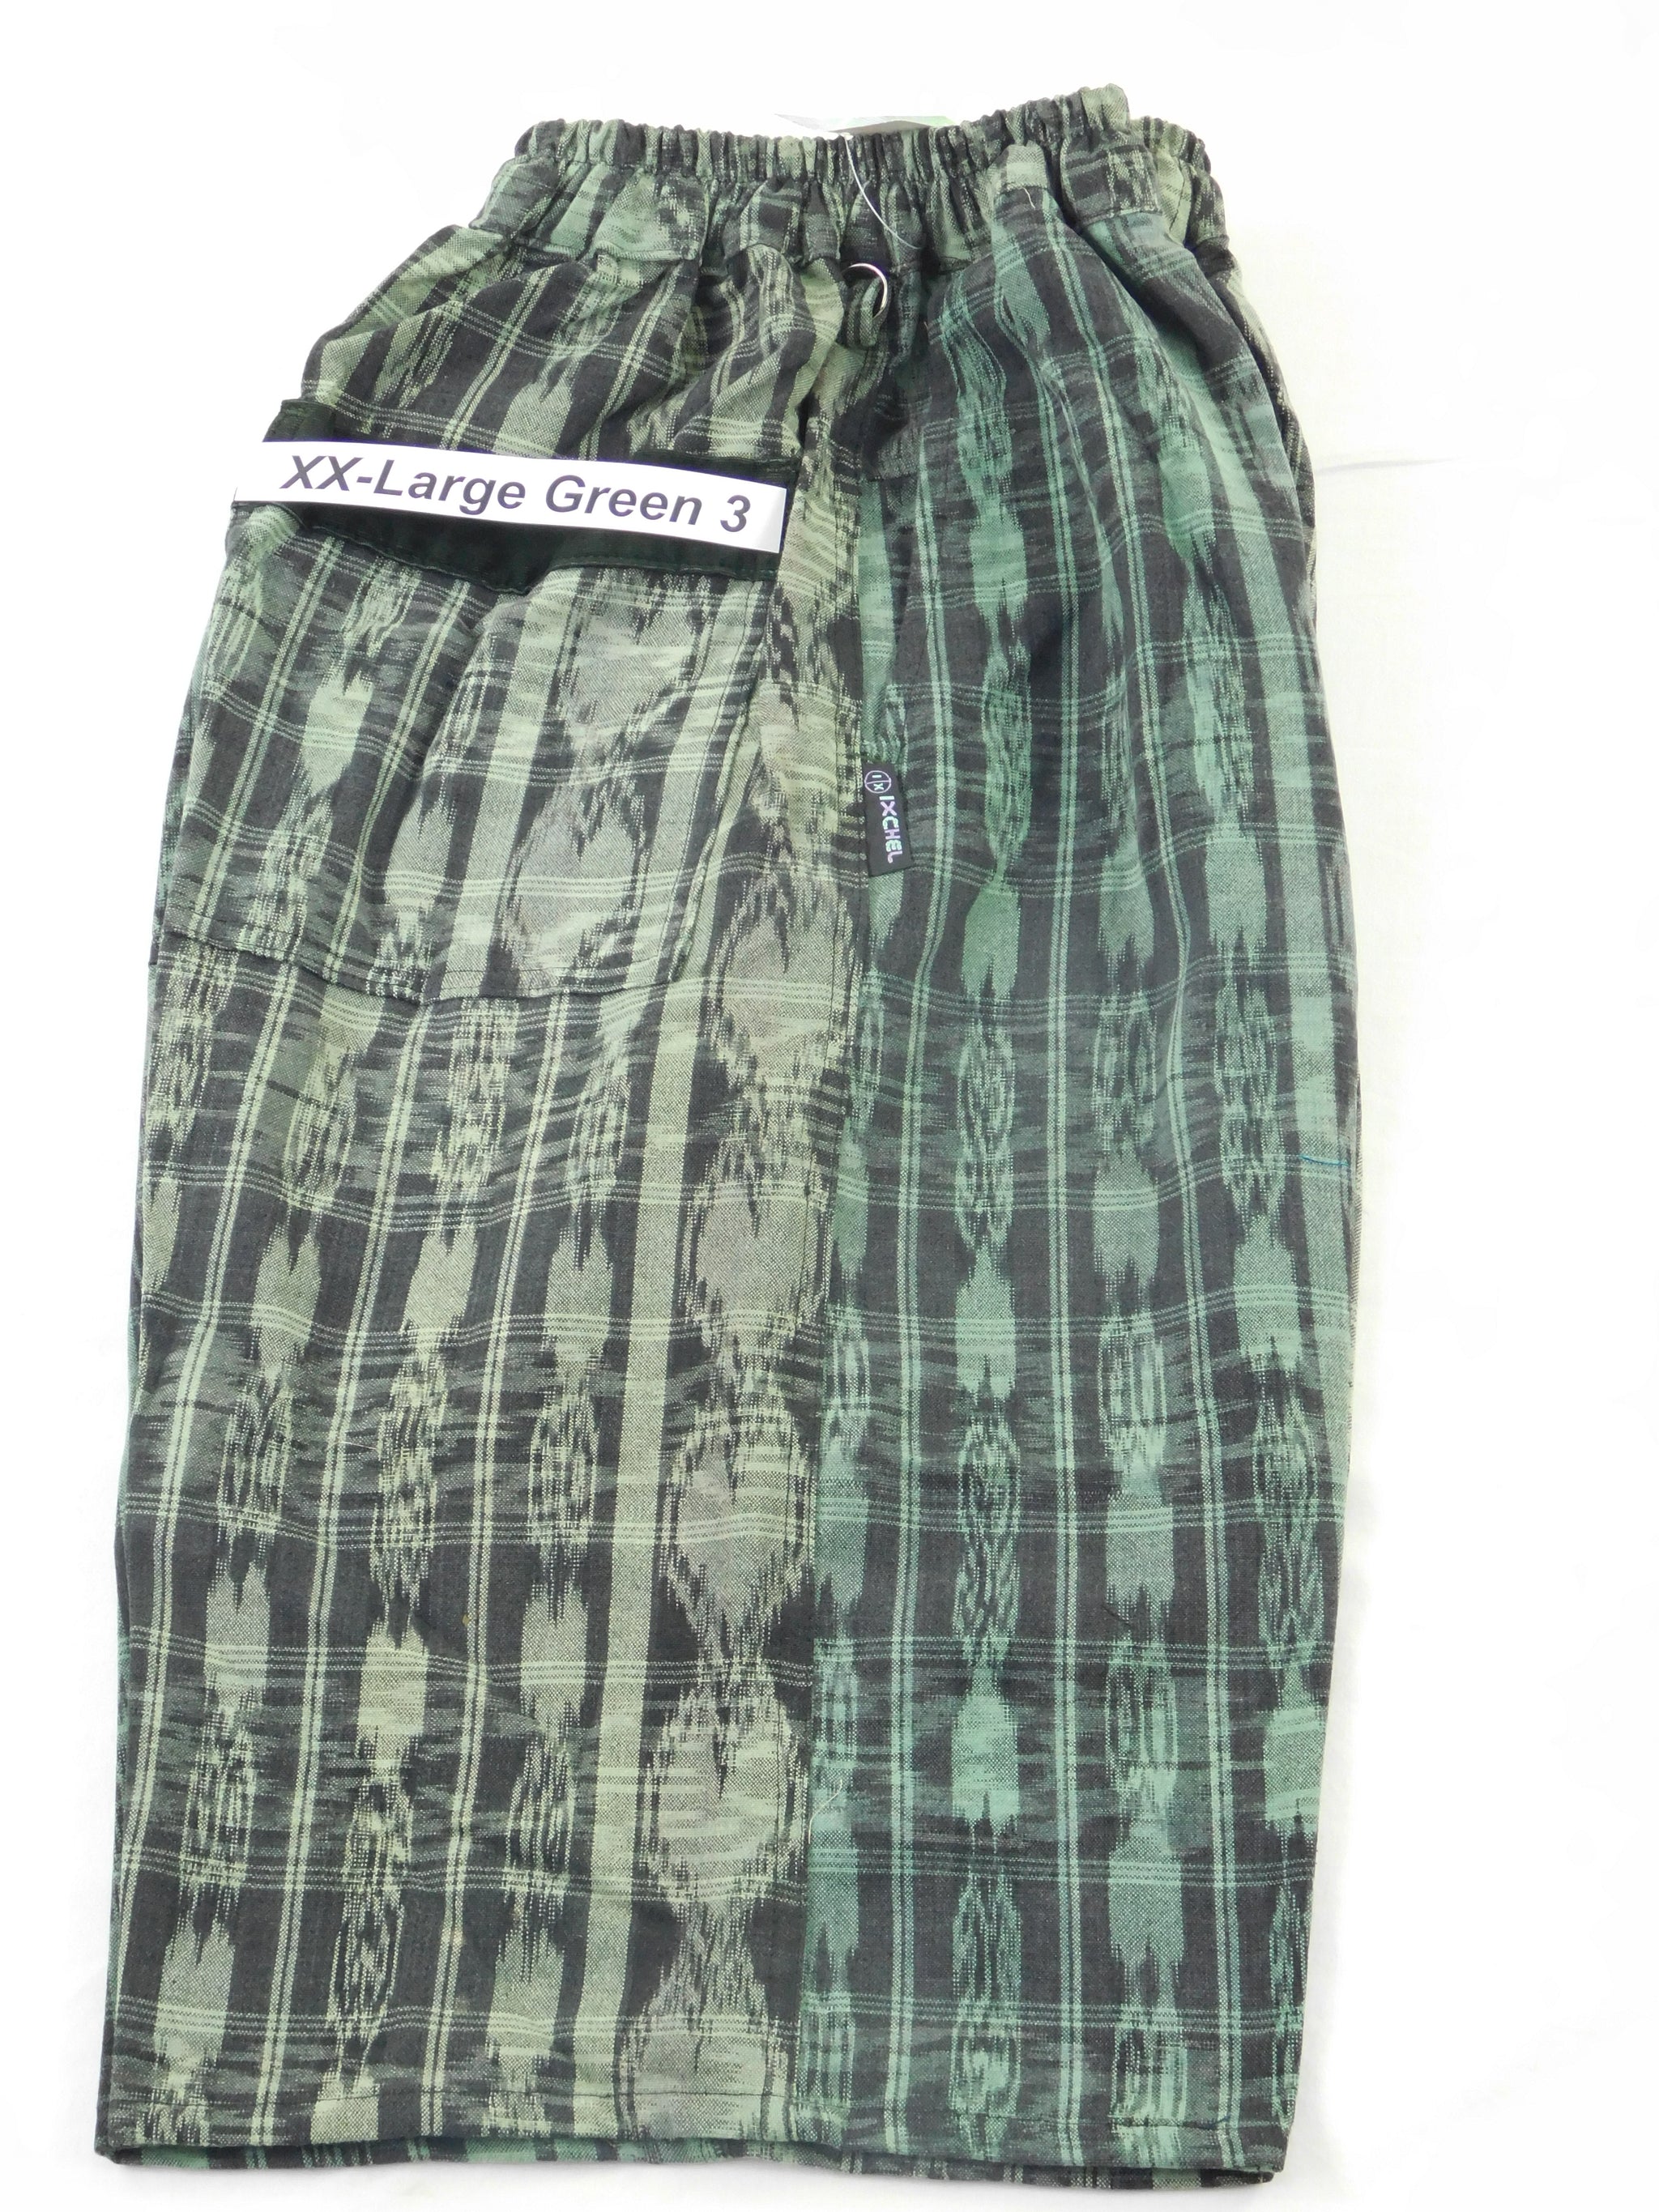 Hand Woven Shorts in Cotton Ikat-Just Restocked!